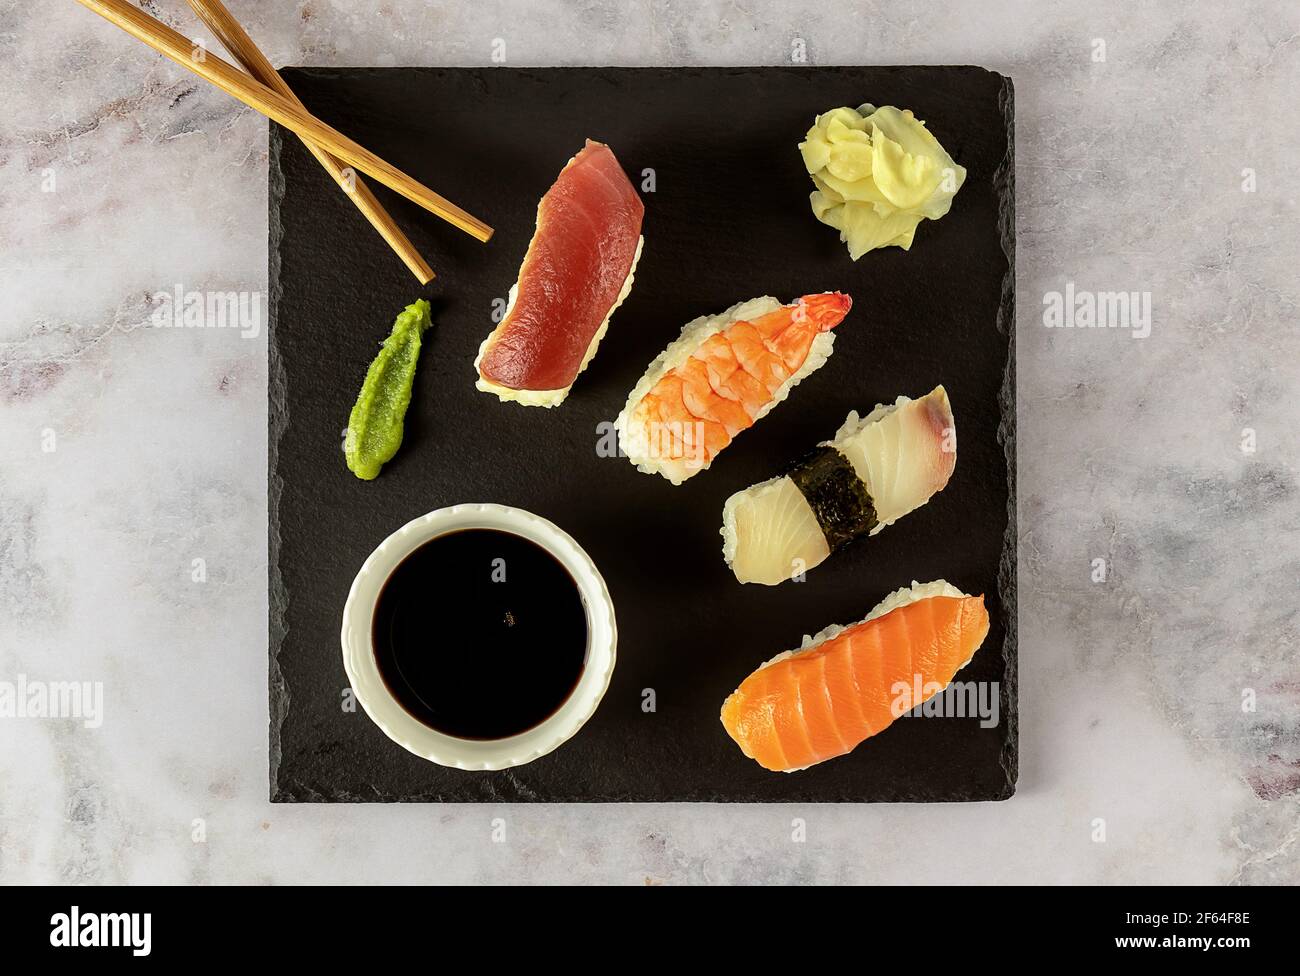 Japanese sushi food. Nigiri with tuna, salmon, shrimp served with soy sauce, ginger, and wasabi.  Stock Photo